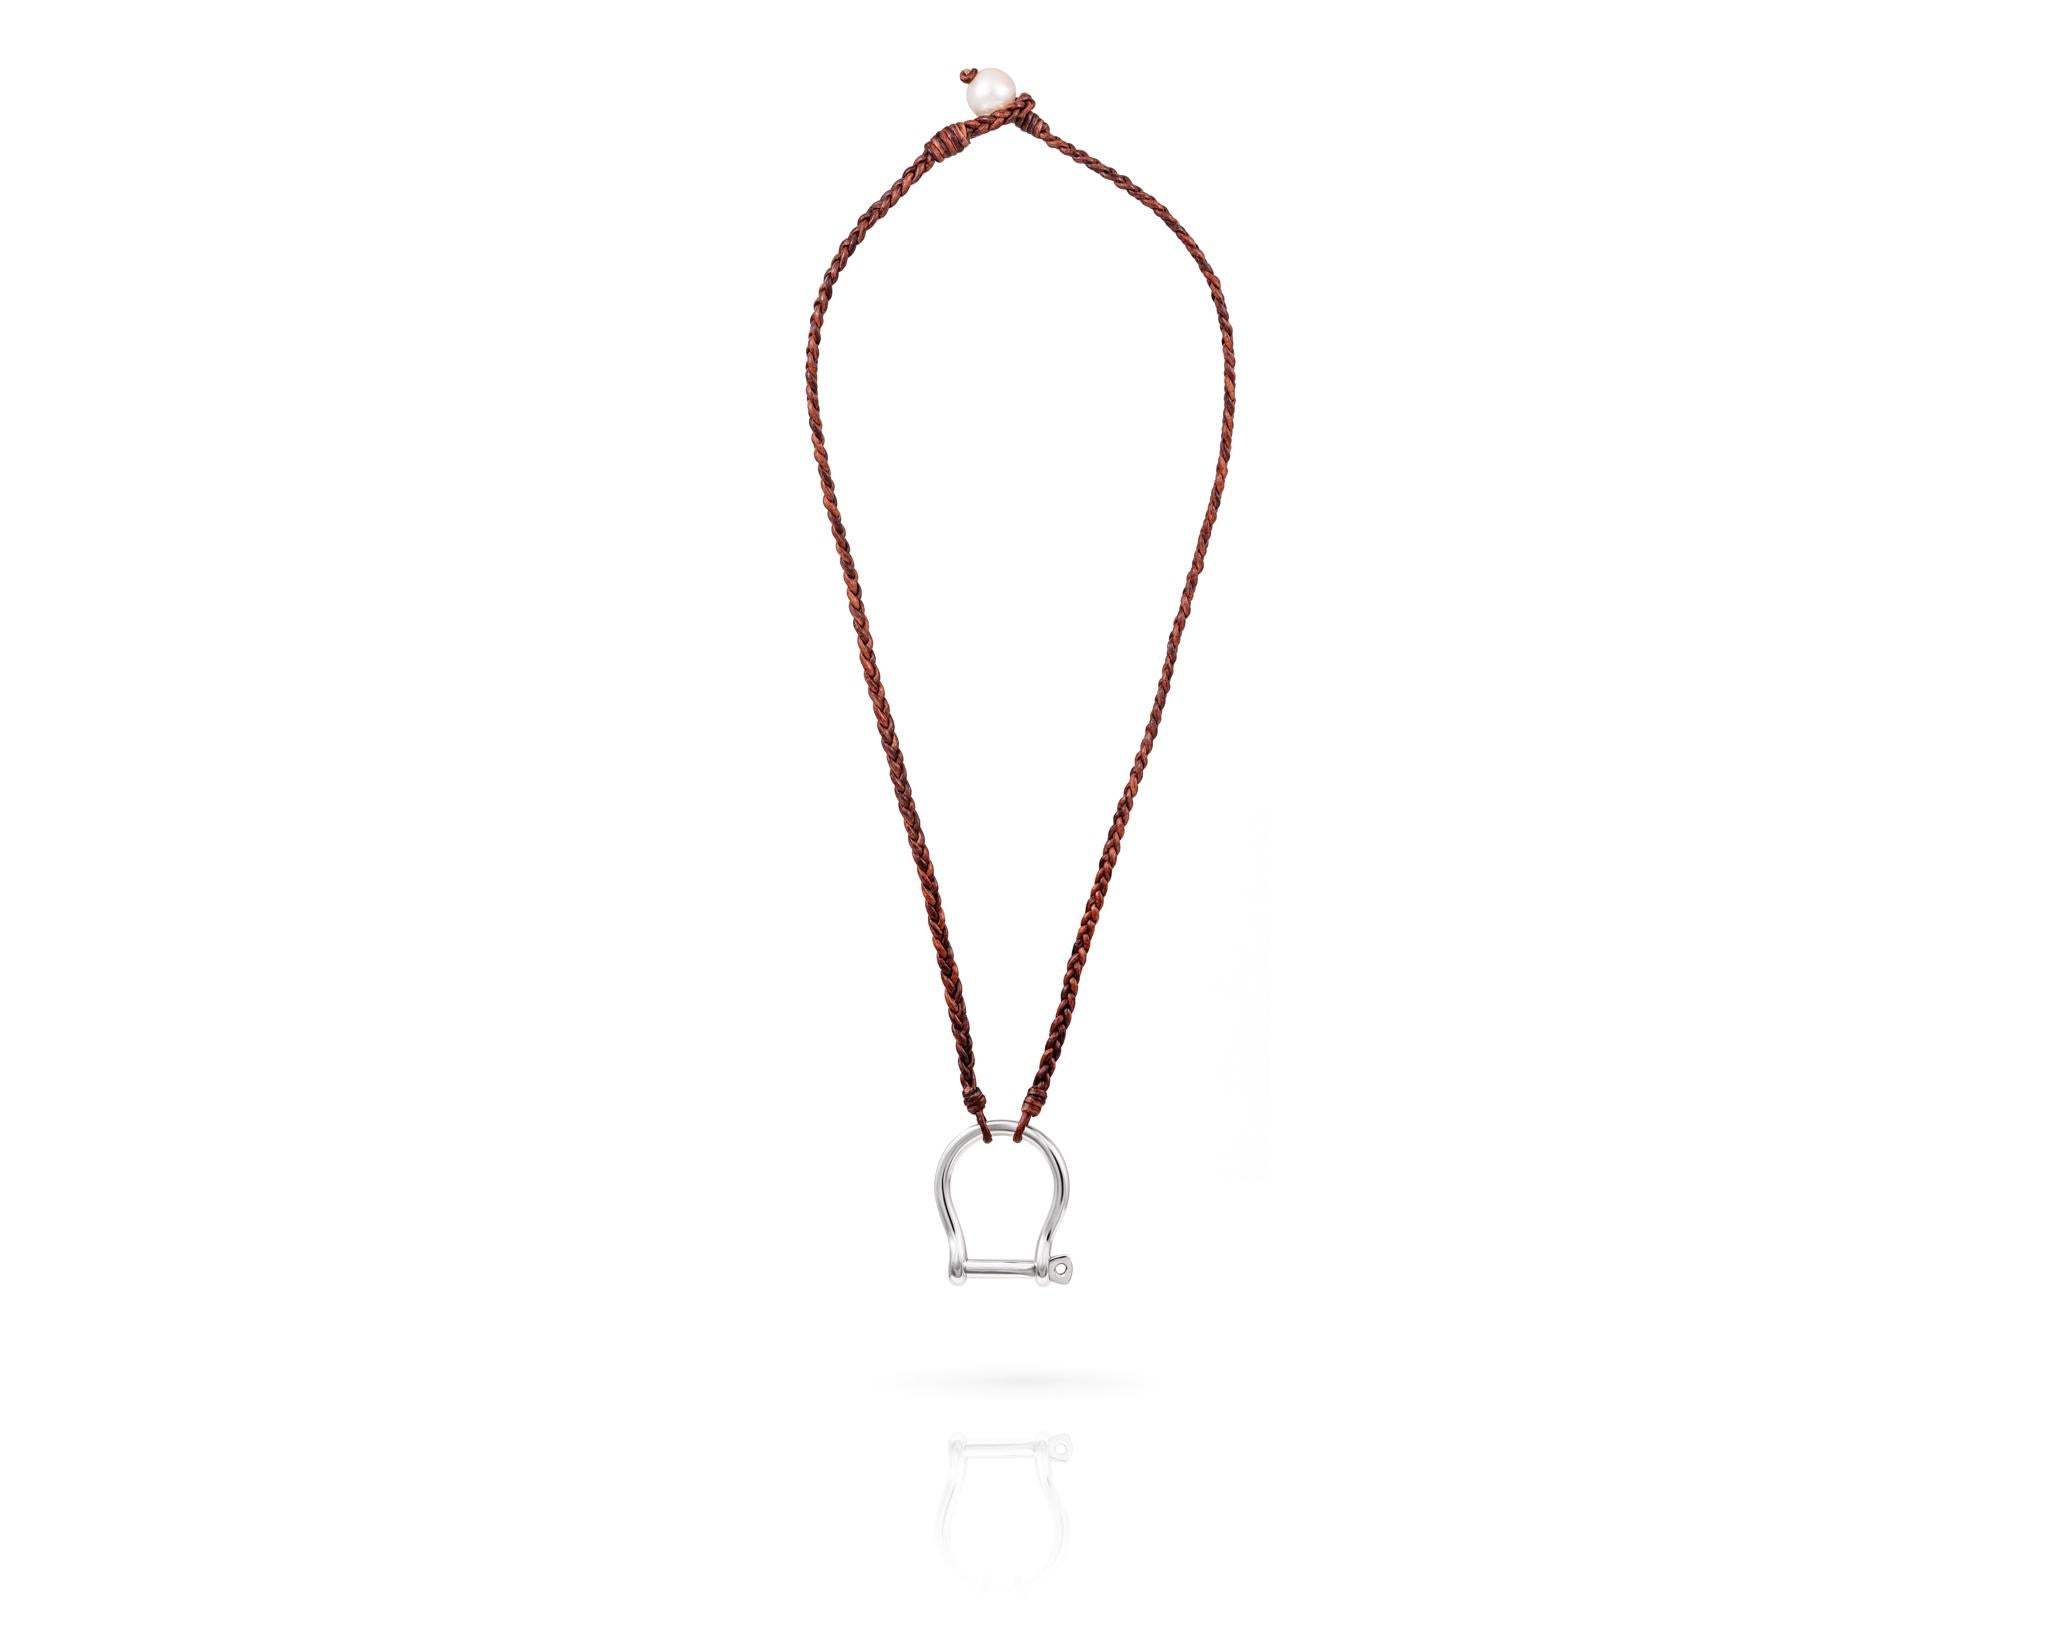 Part of the Vincent Peach Equestrian Collection, the Shackle Necklace has a luxurious Sterling Silver Shackle Pendant with a Removable Screw to hold it together on a 17